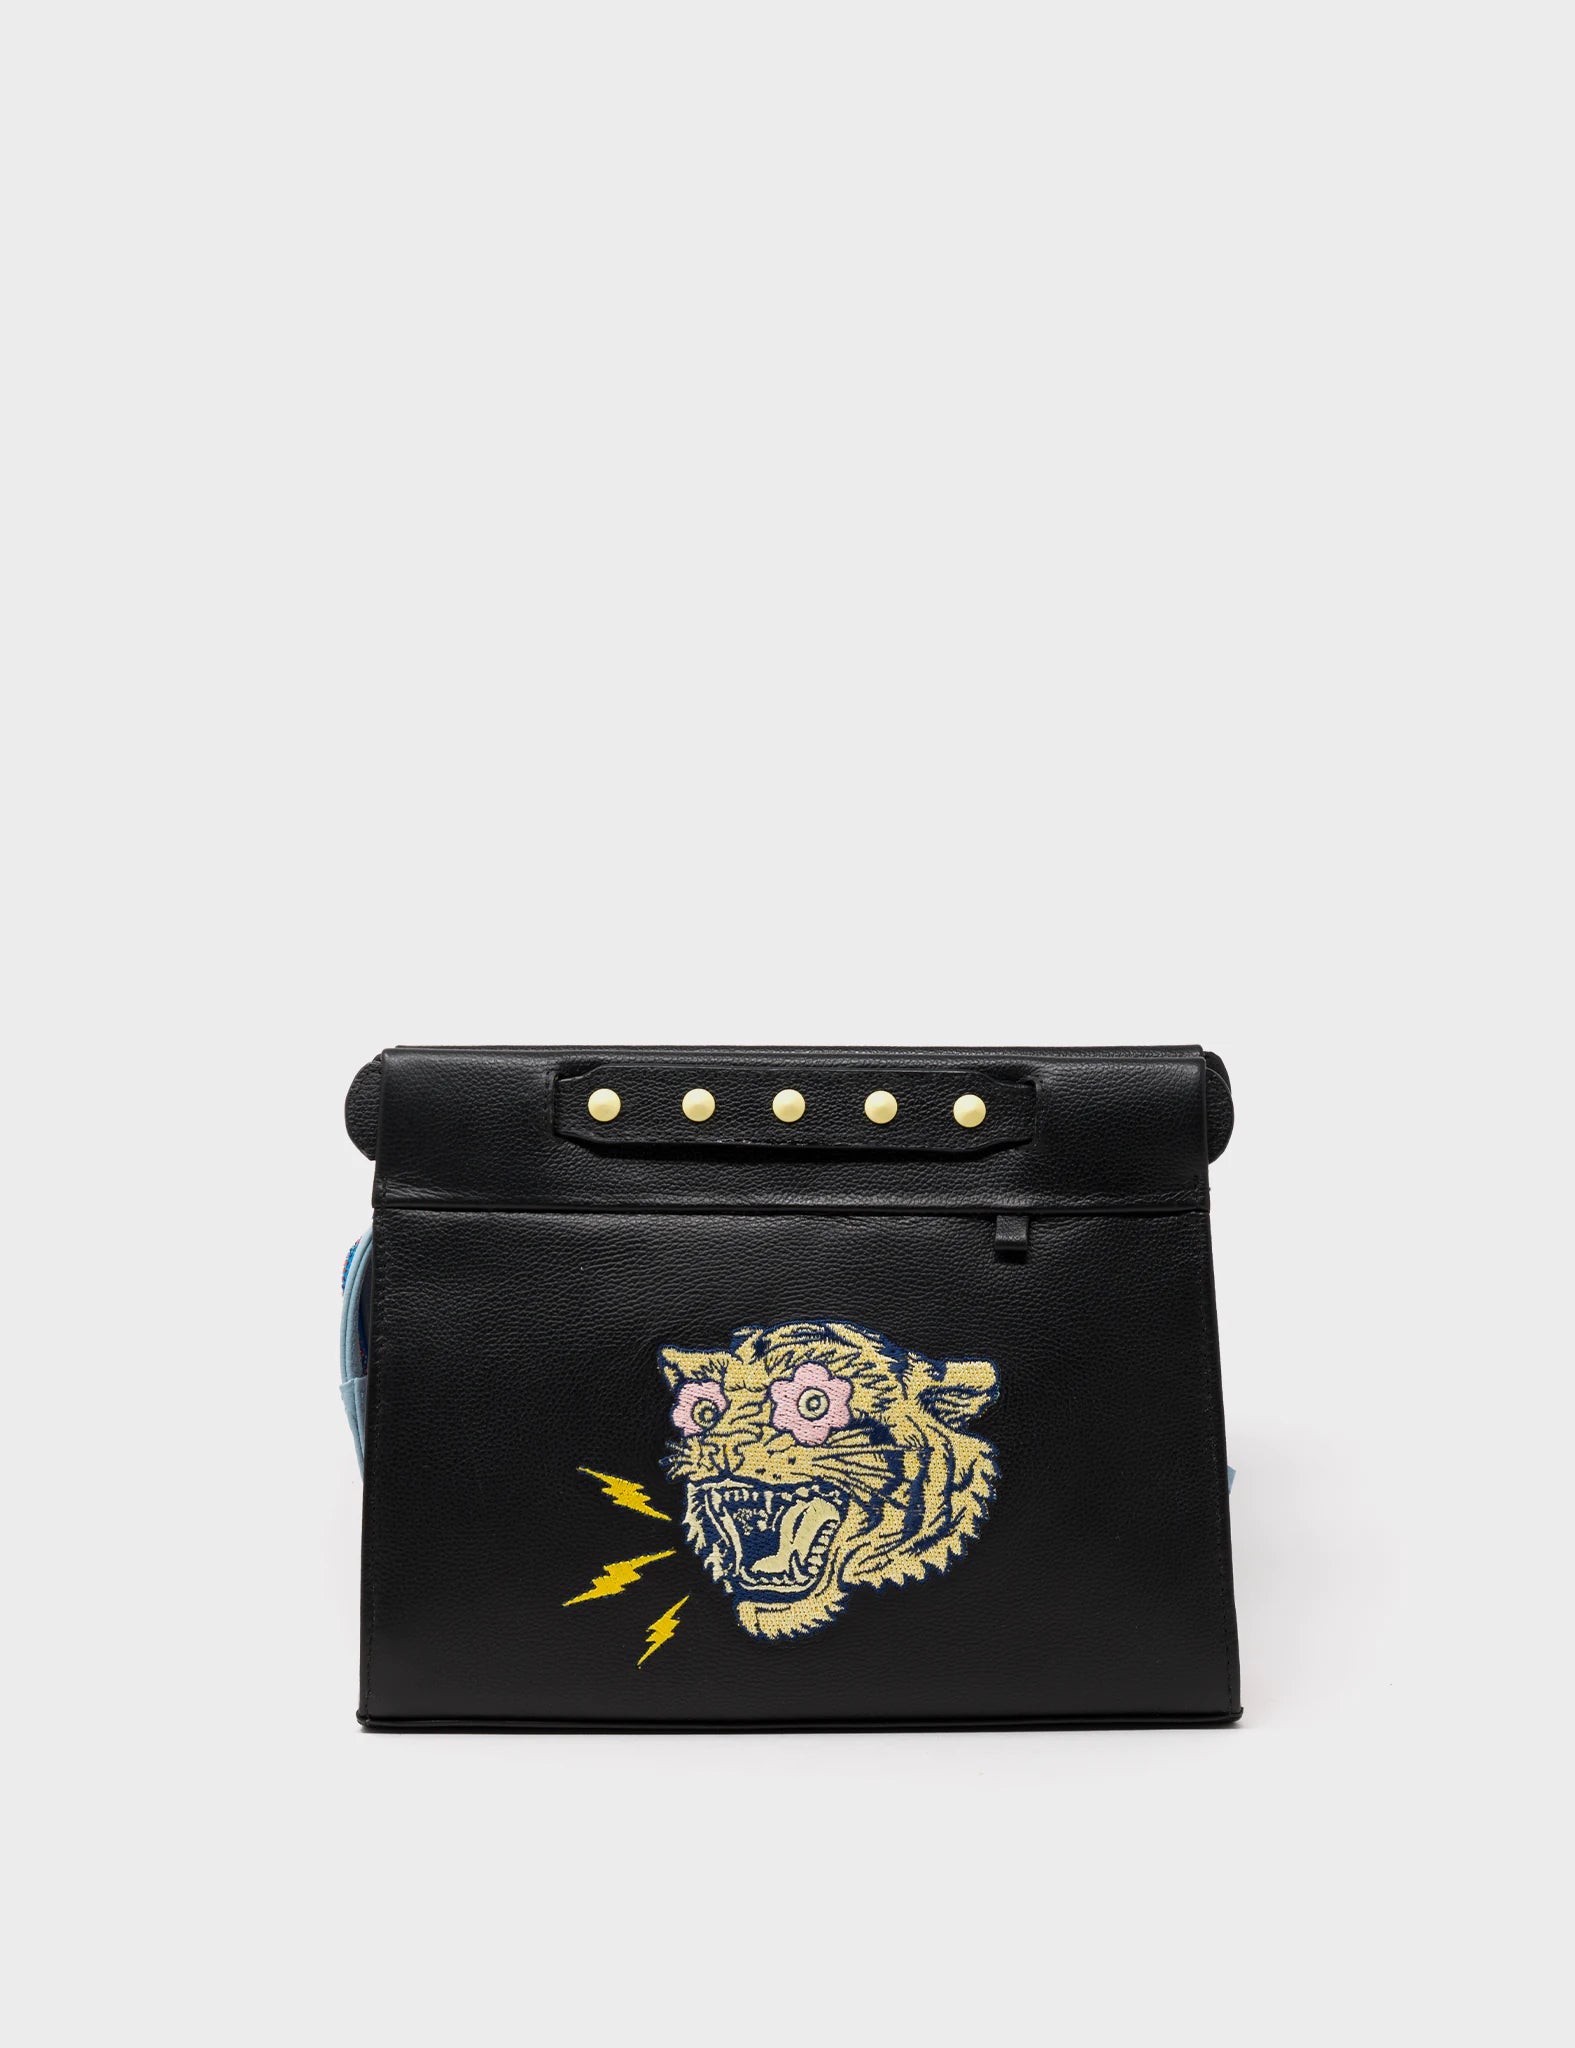 Crossbody Black Leather bag Herocity Tiger Face Comic Style Embroidery - front view